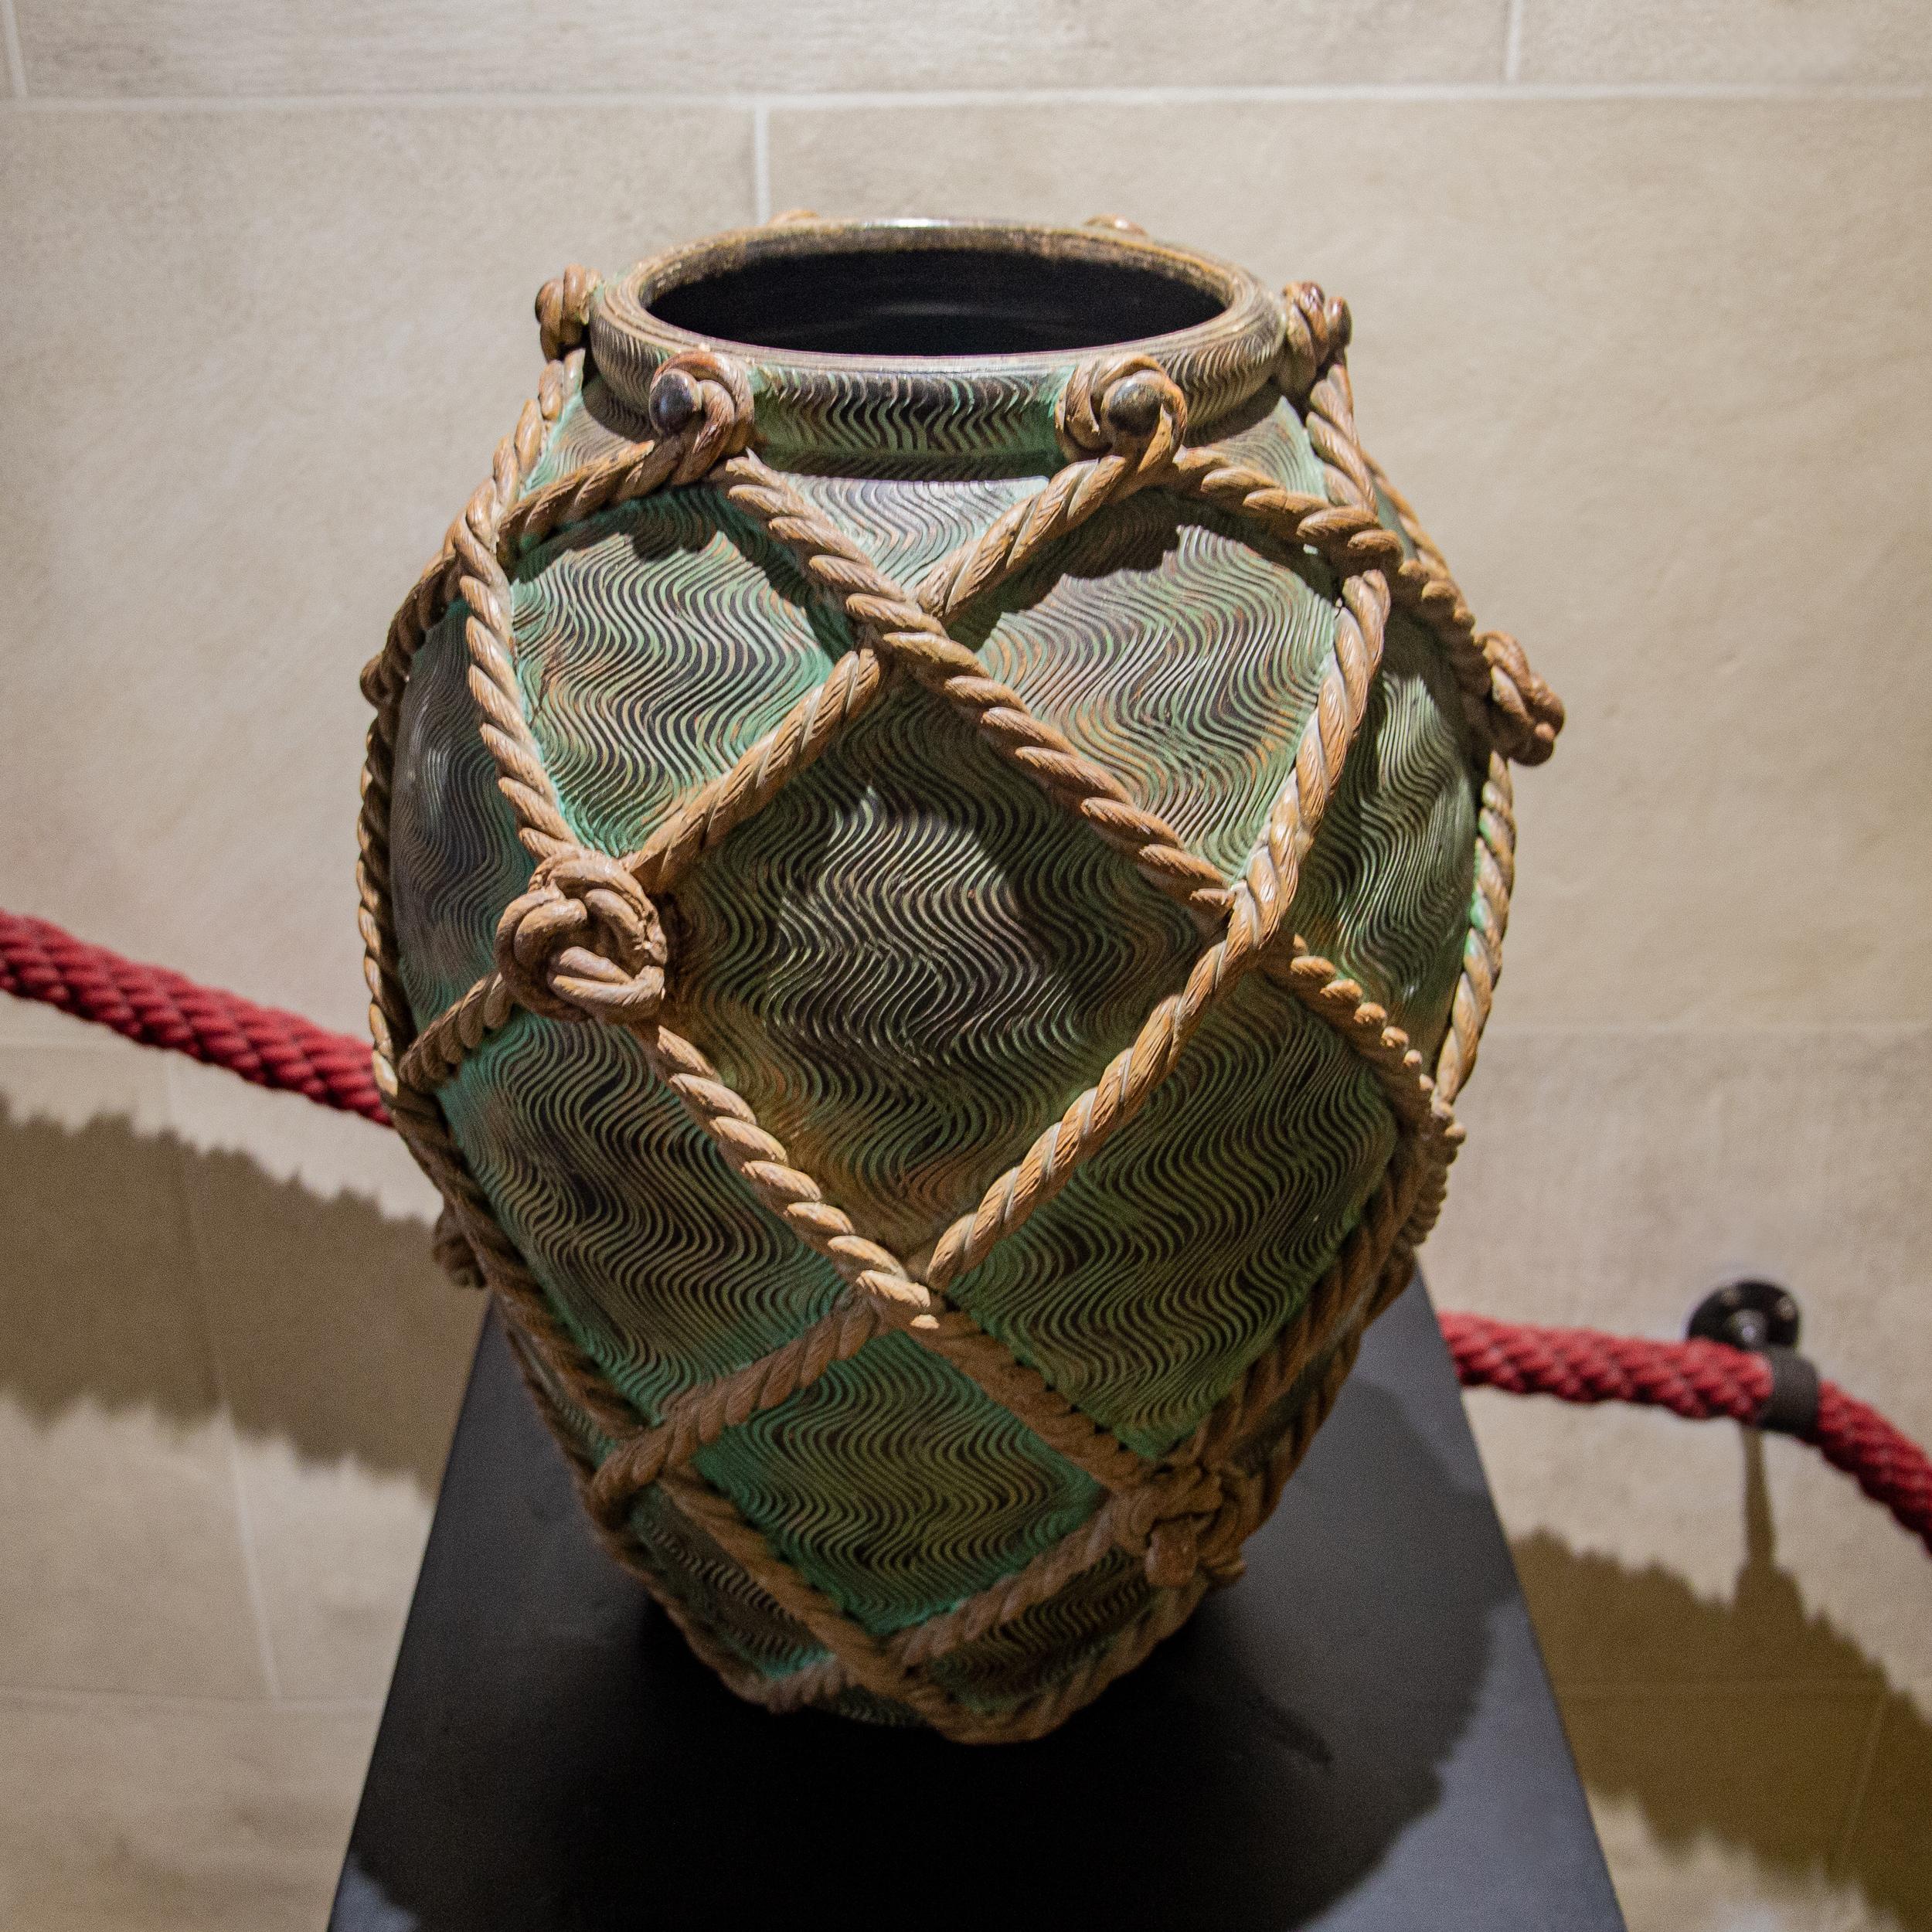 A twisted rope ceramic urn by Ugo Zaccagnini - Firenze 1930s, signed In Good Condition For Sale In London, GB